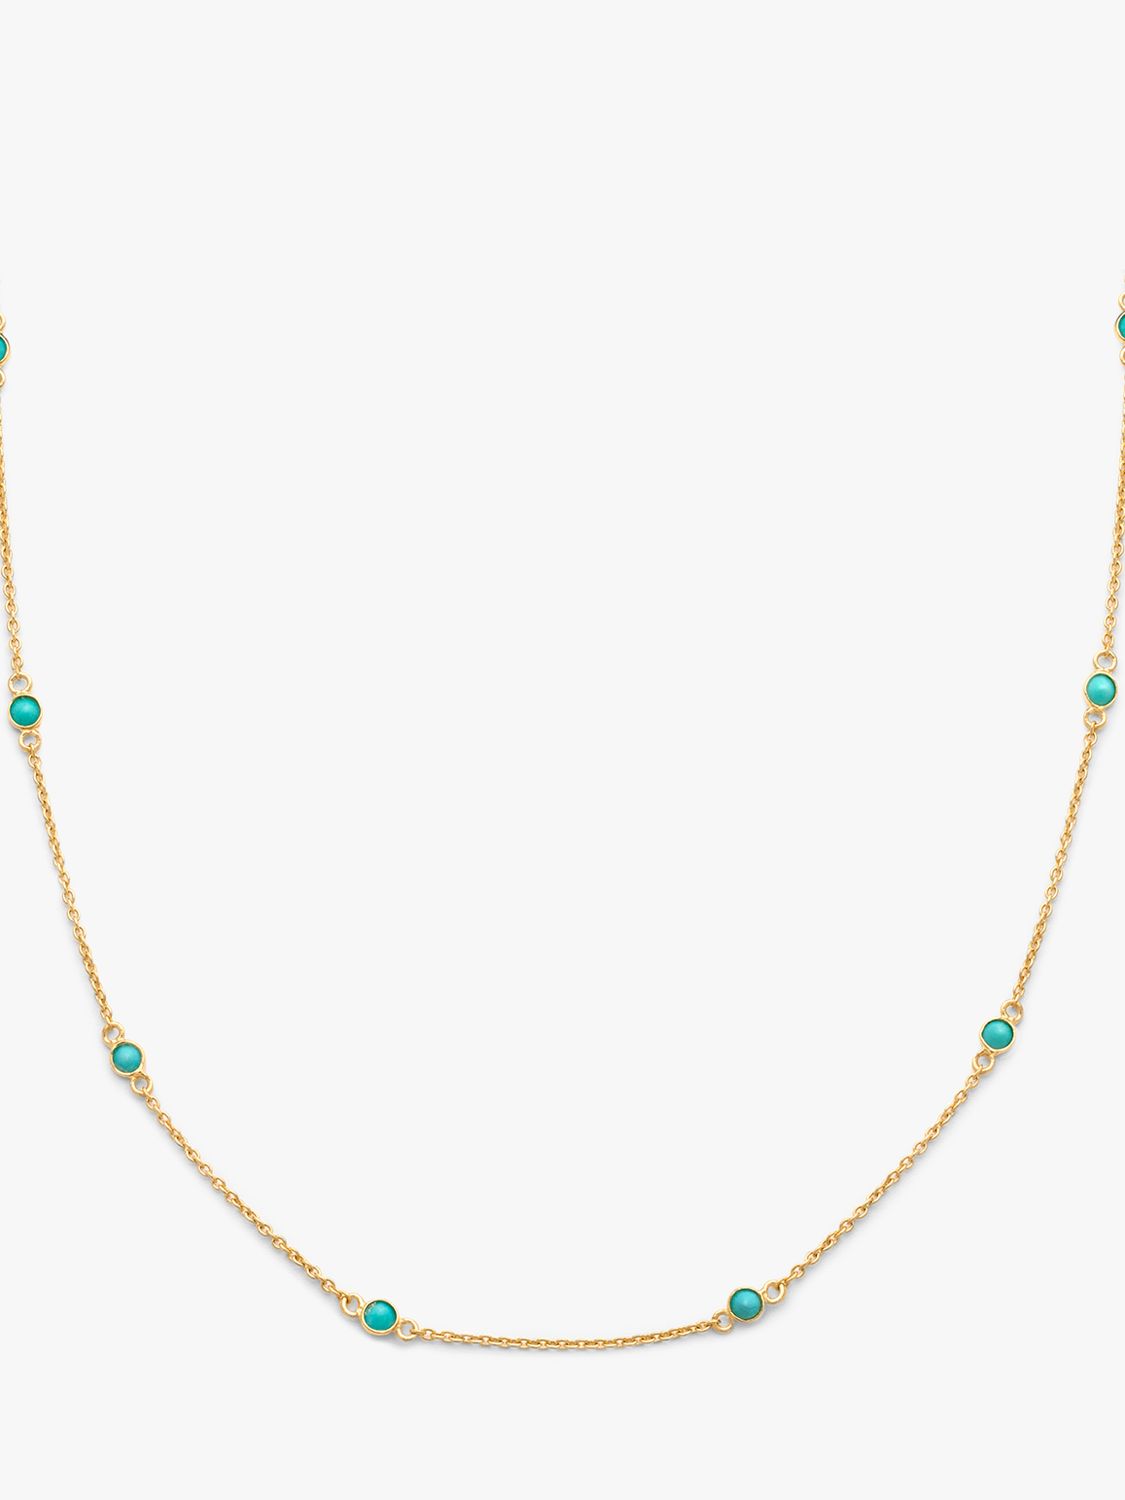 Leah Alexandra Floatesse Turquoise Chain Necklace, Gold/Green